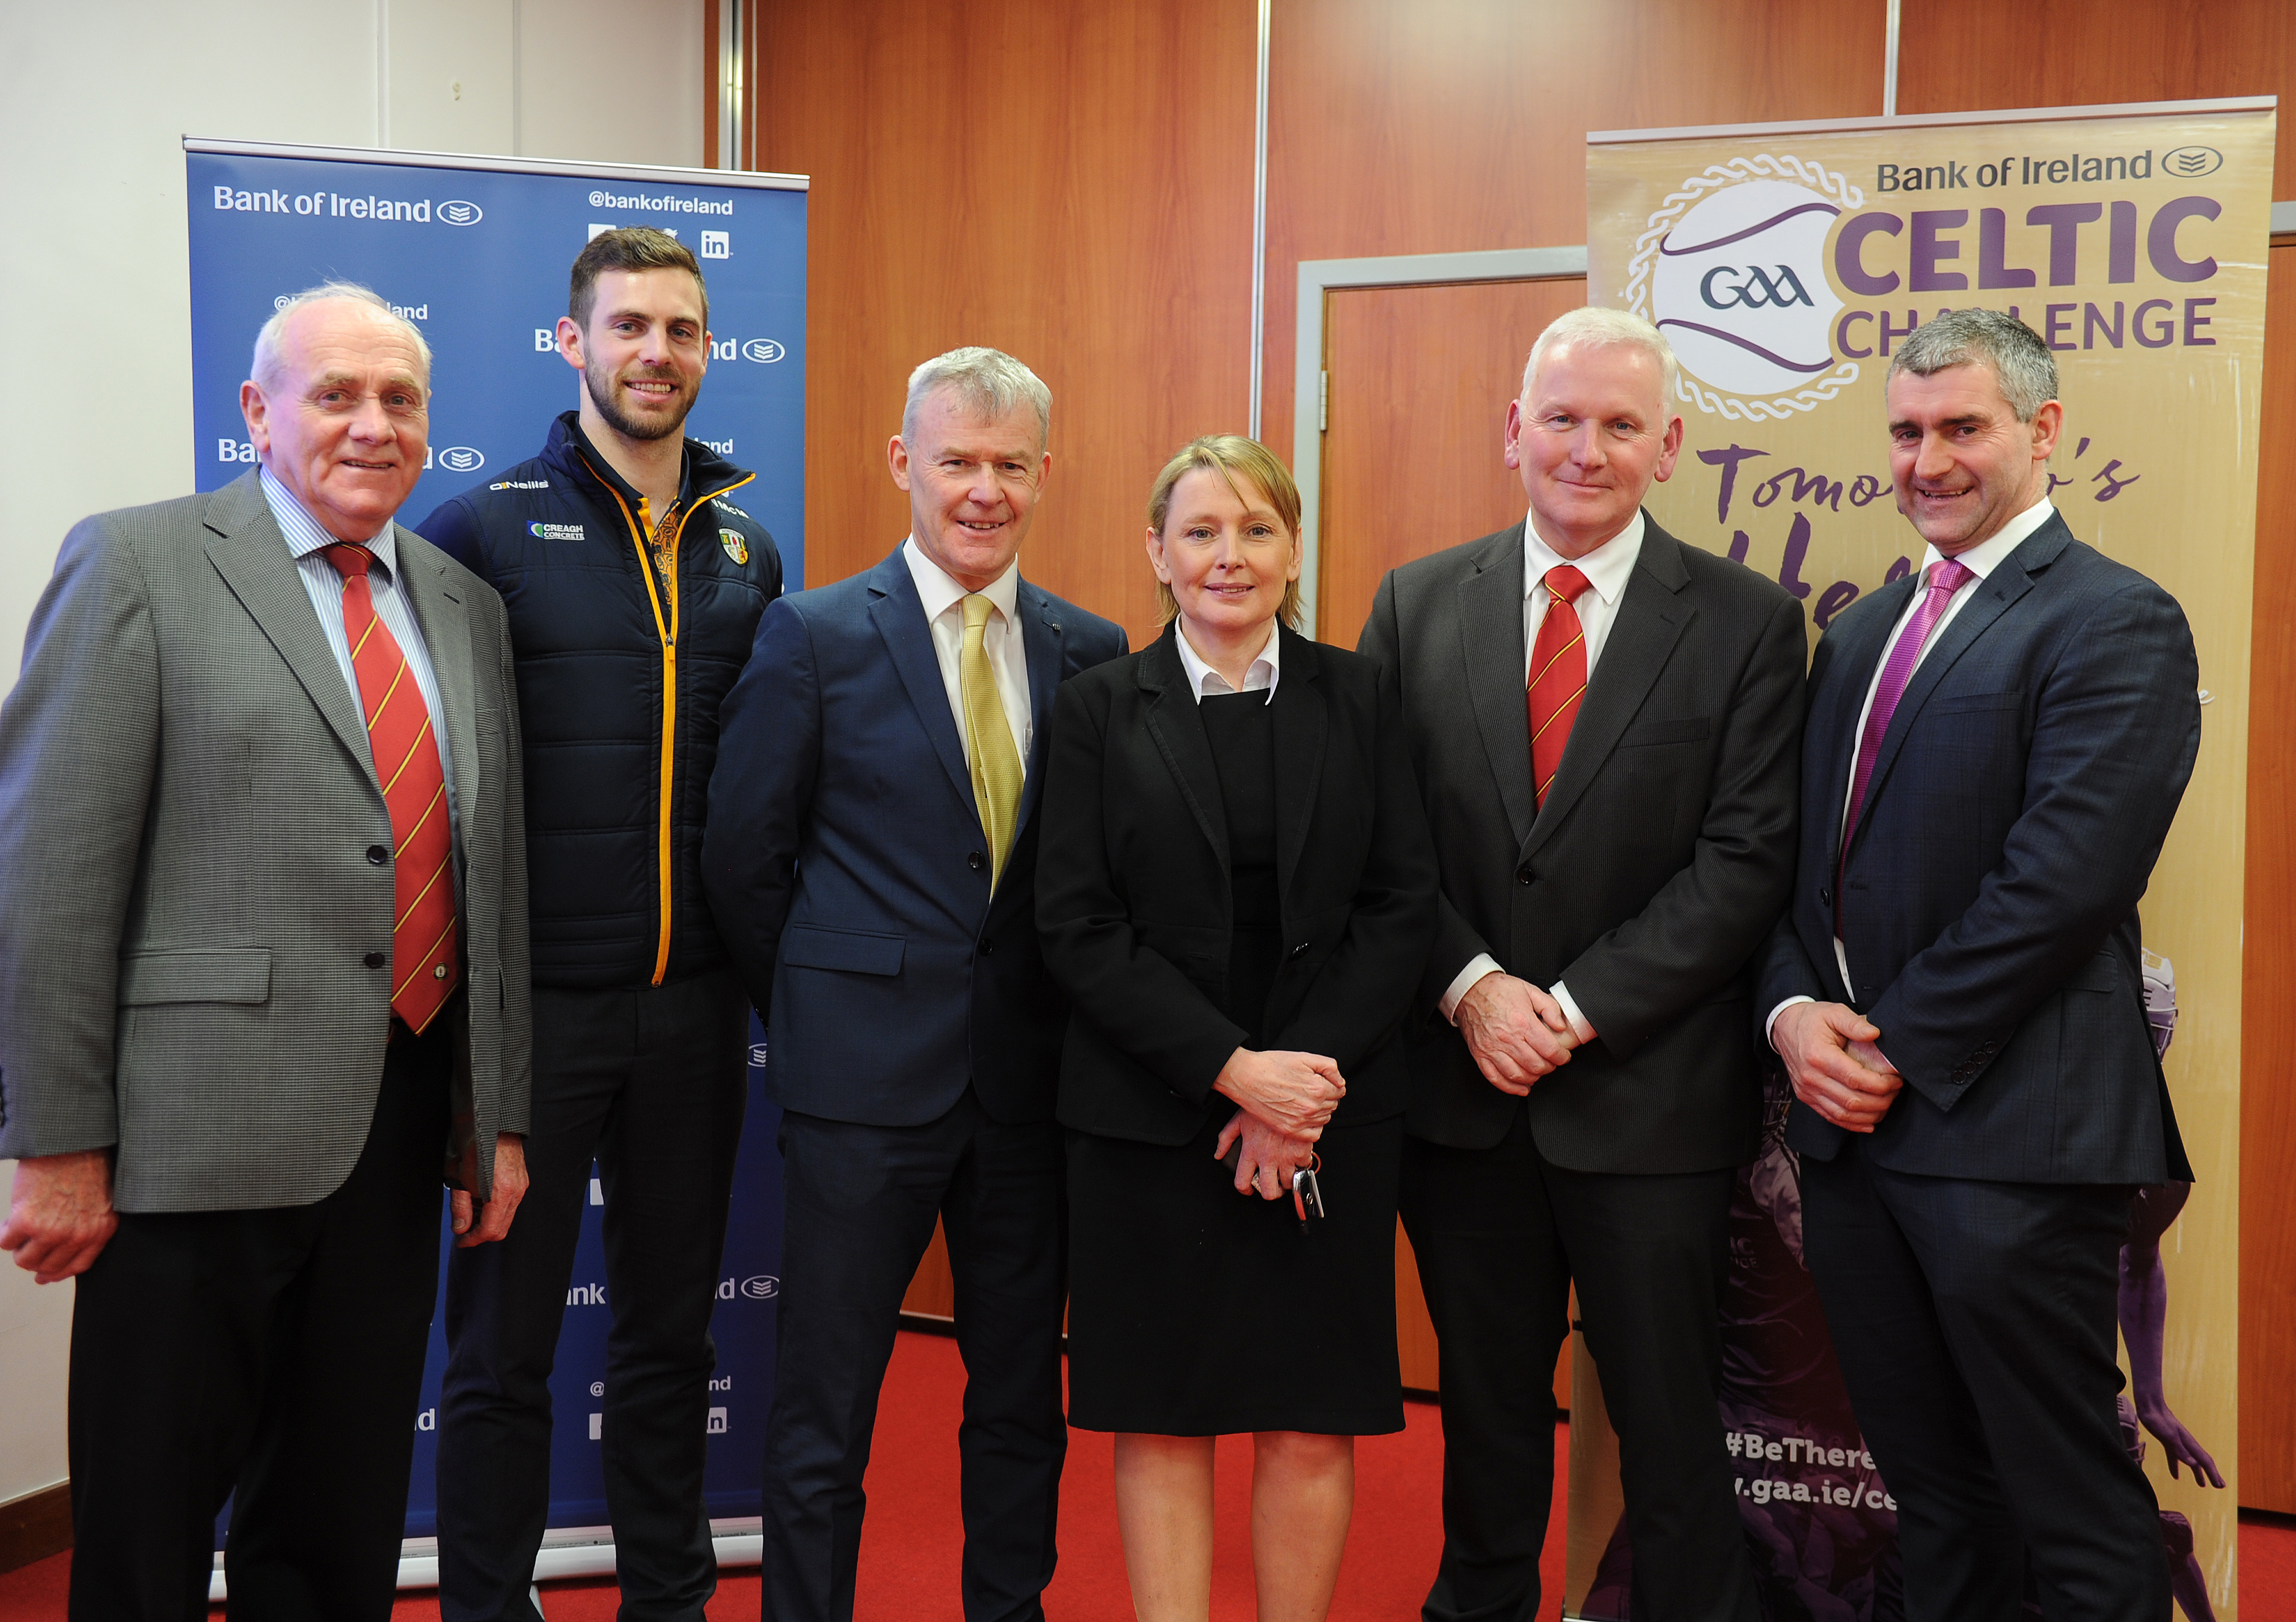 The Bank of Ireland Celtic Challenge 2018 Ulster Launch